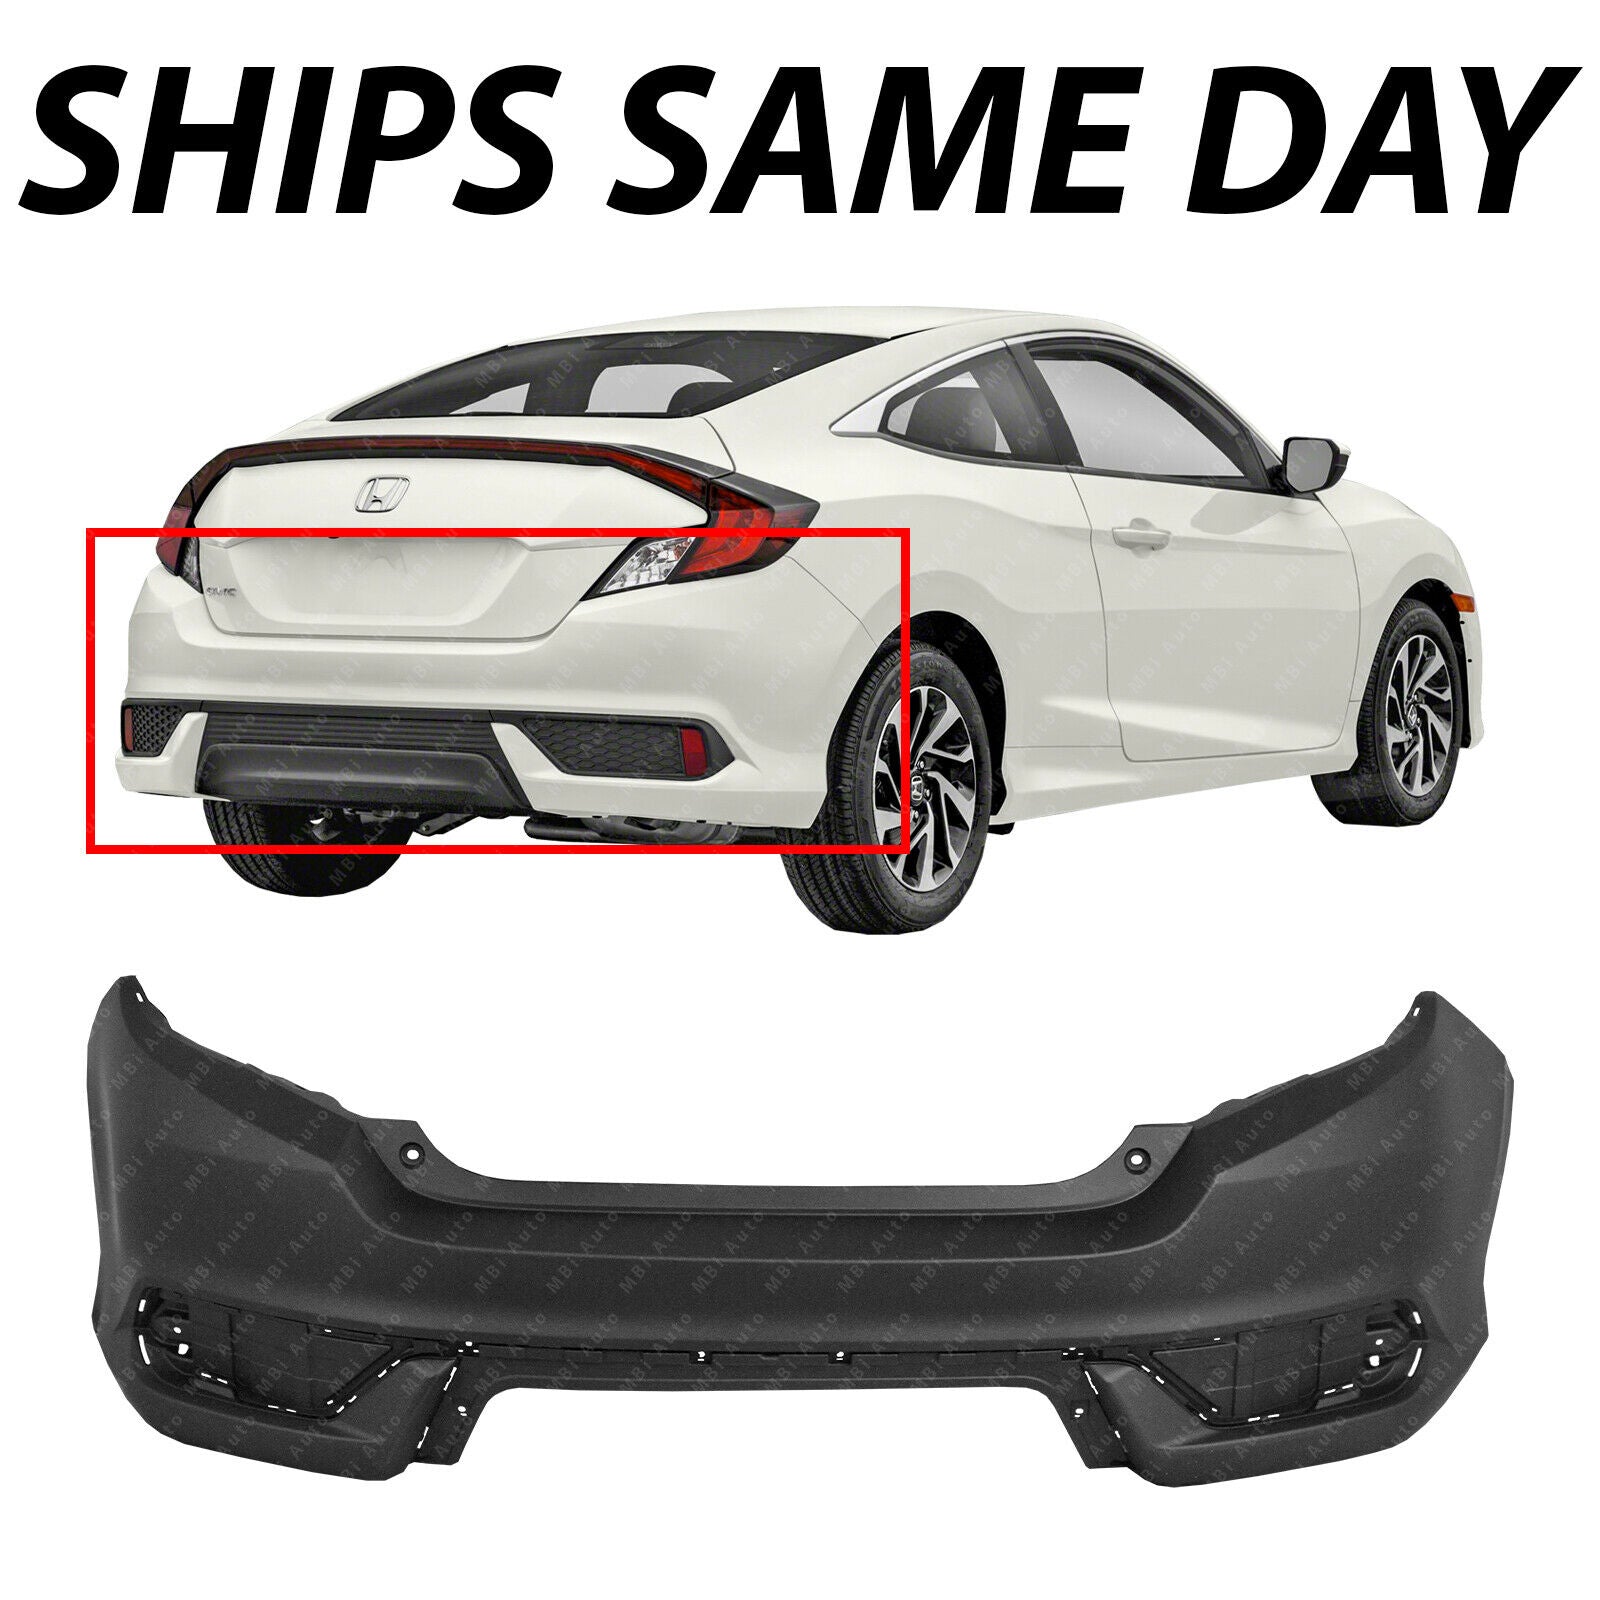 NEW Primered Rear Bumper Cover Replacement for 2016-2020 Honda Civic Coupe 16-20